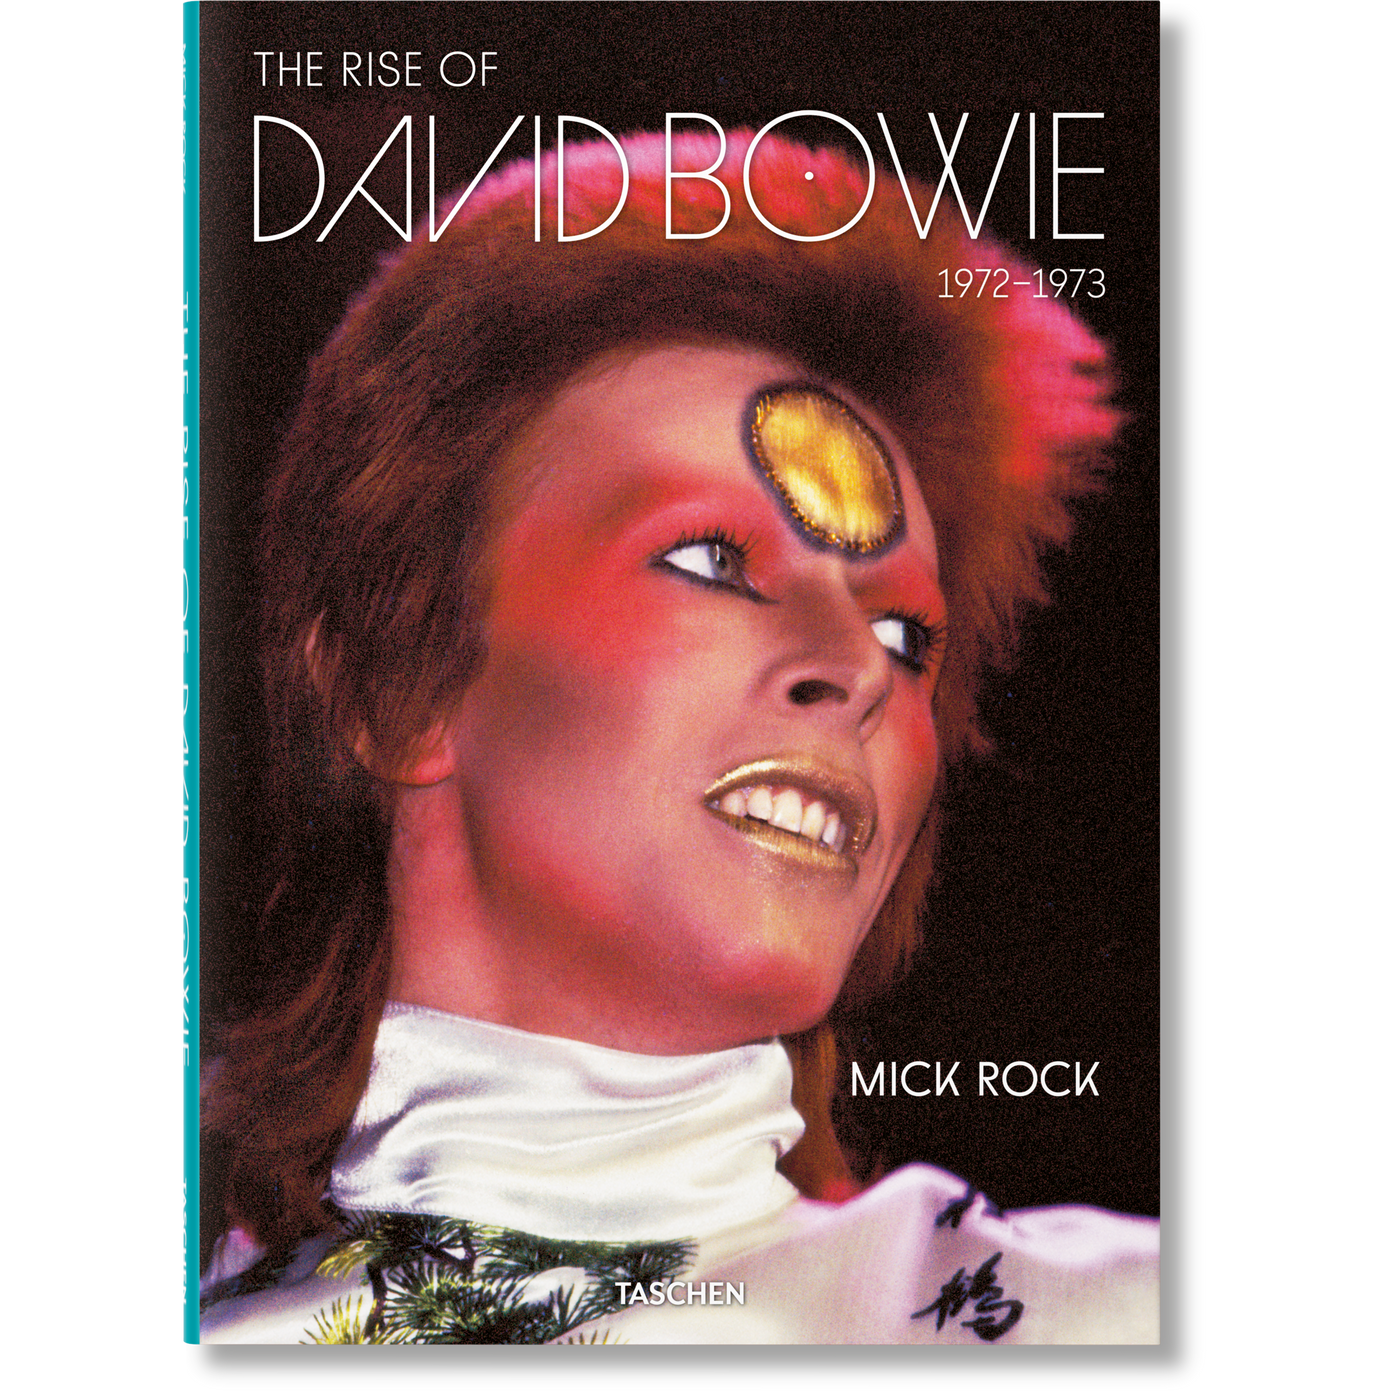 The Rise of David Bowie 1972-1973